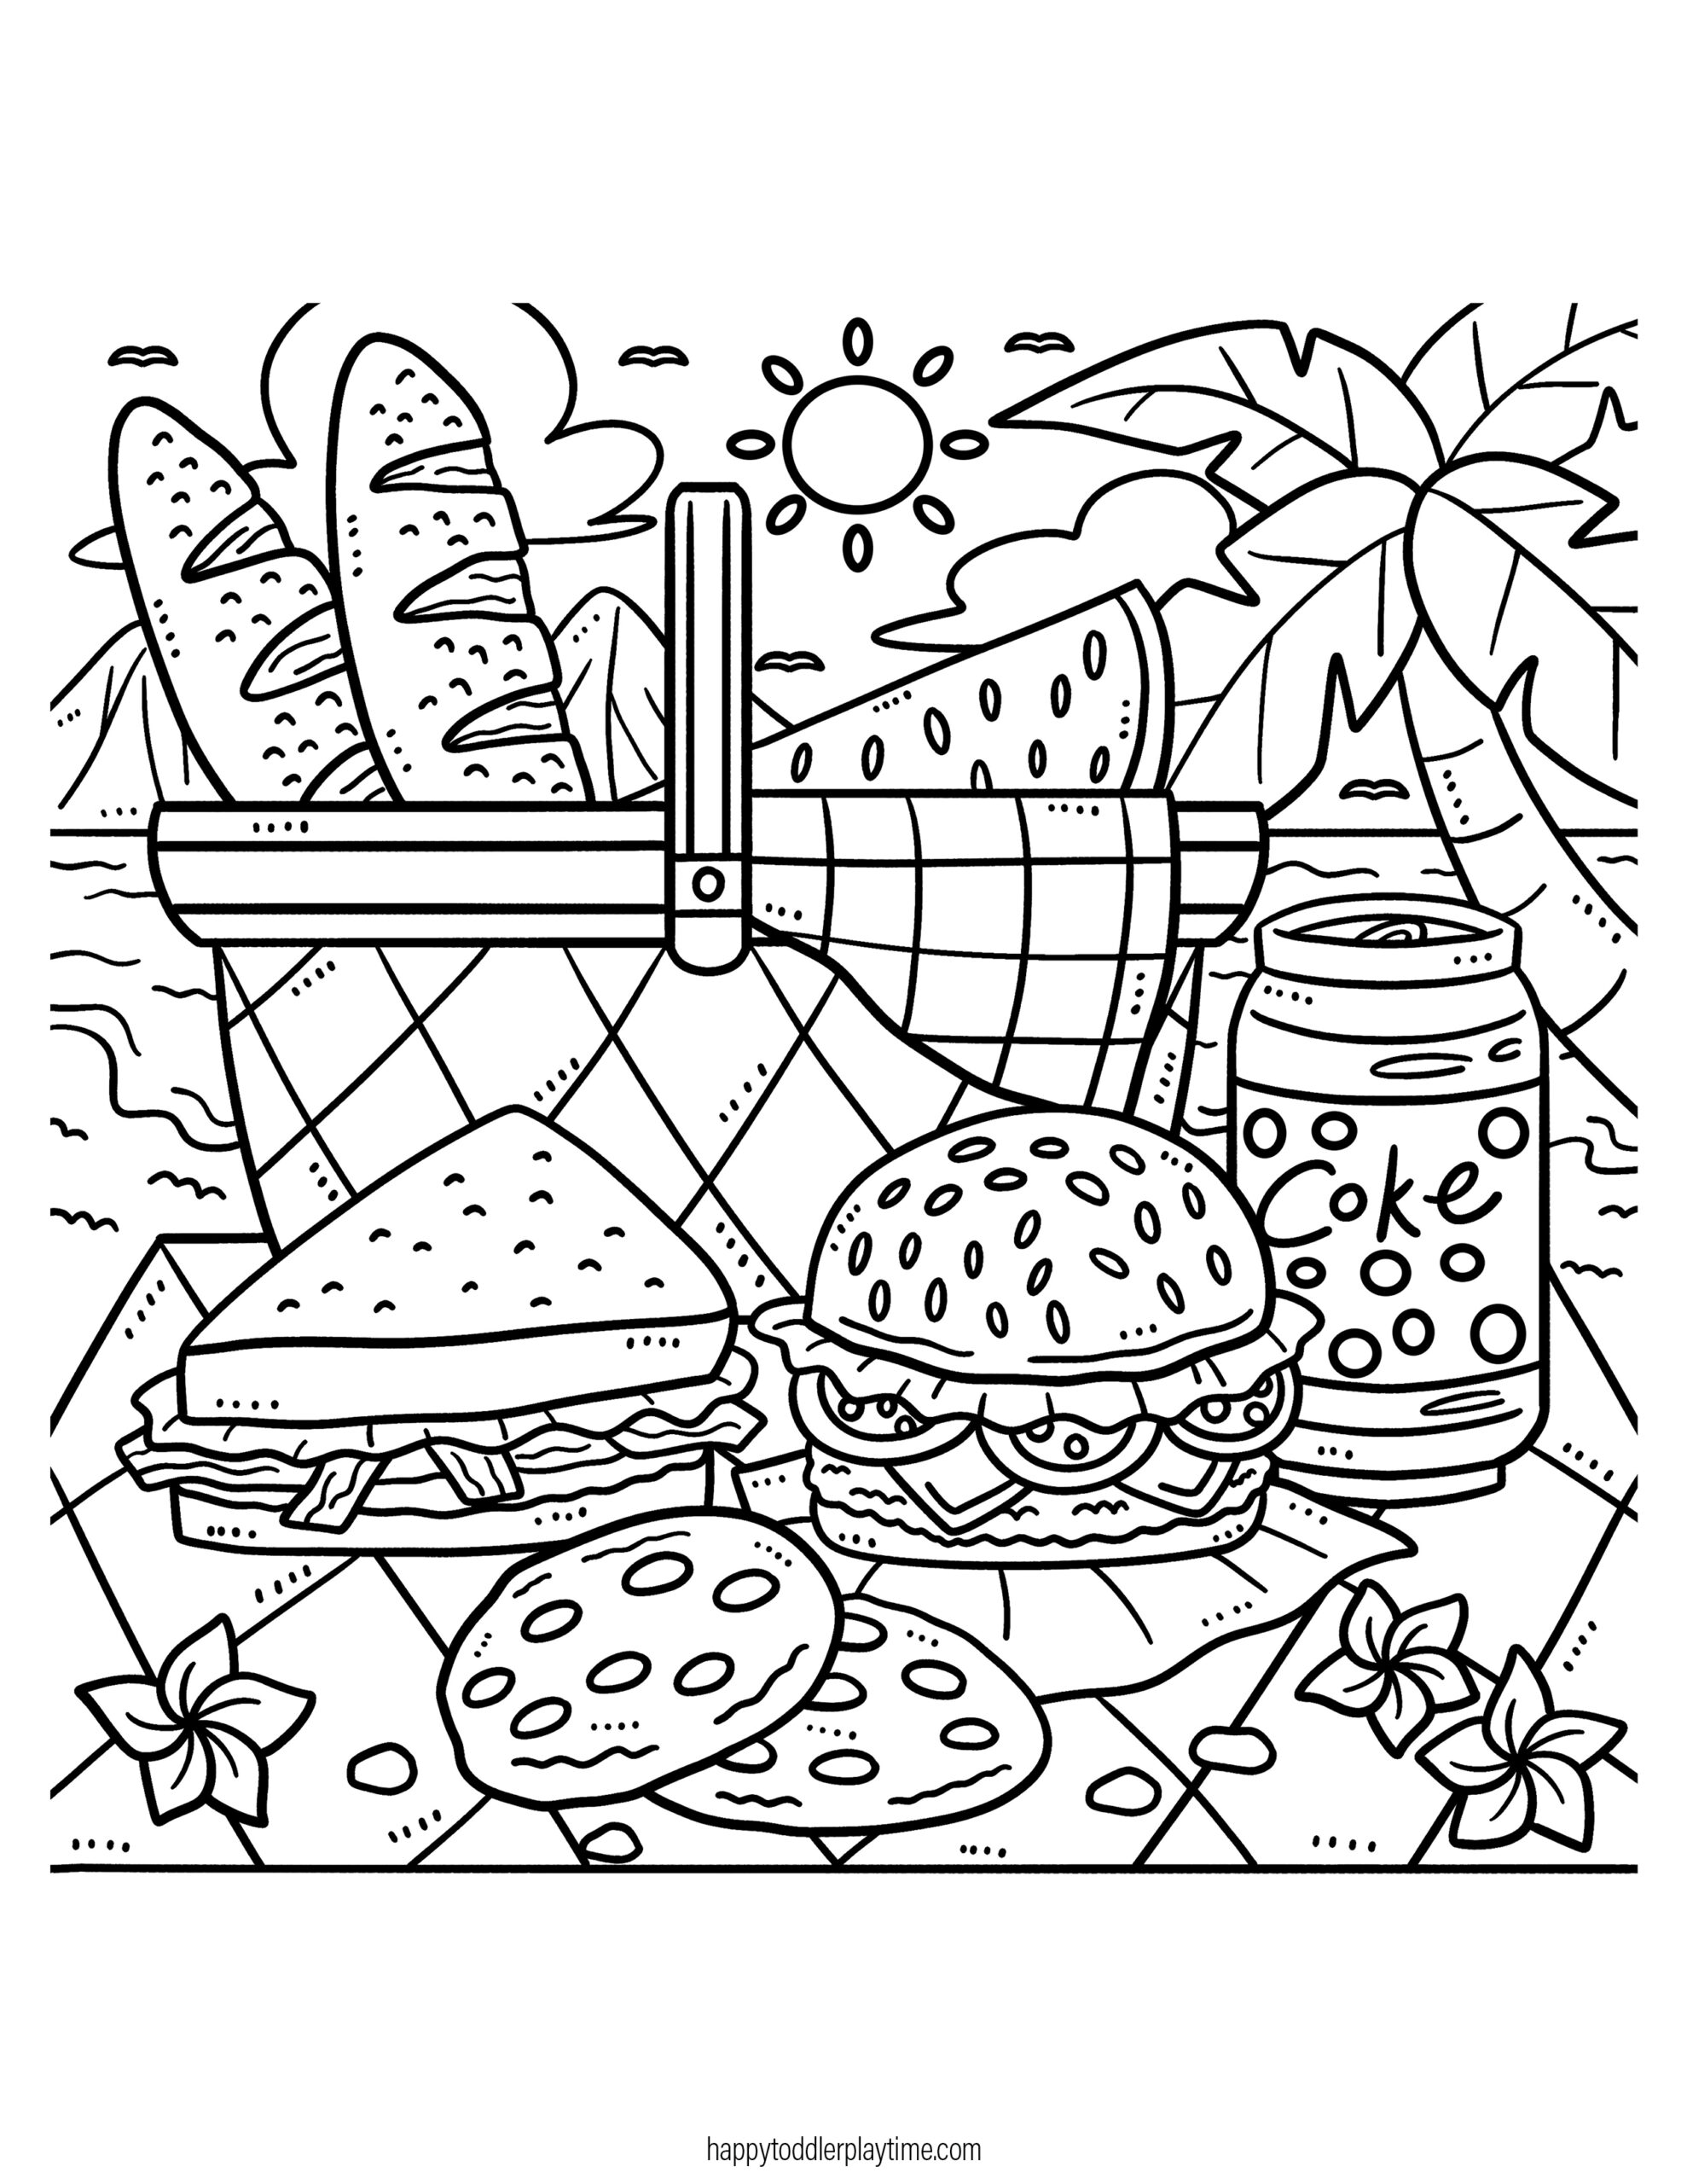 Free printable summer colouring pages for kids